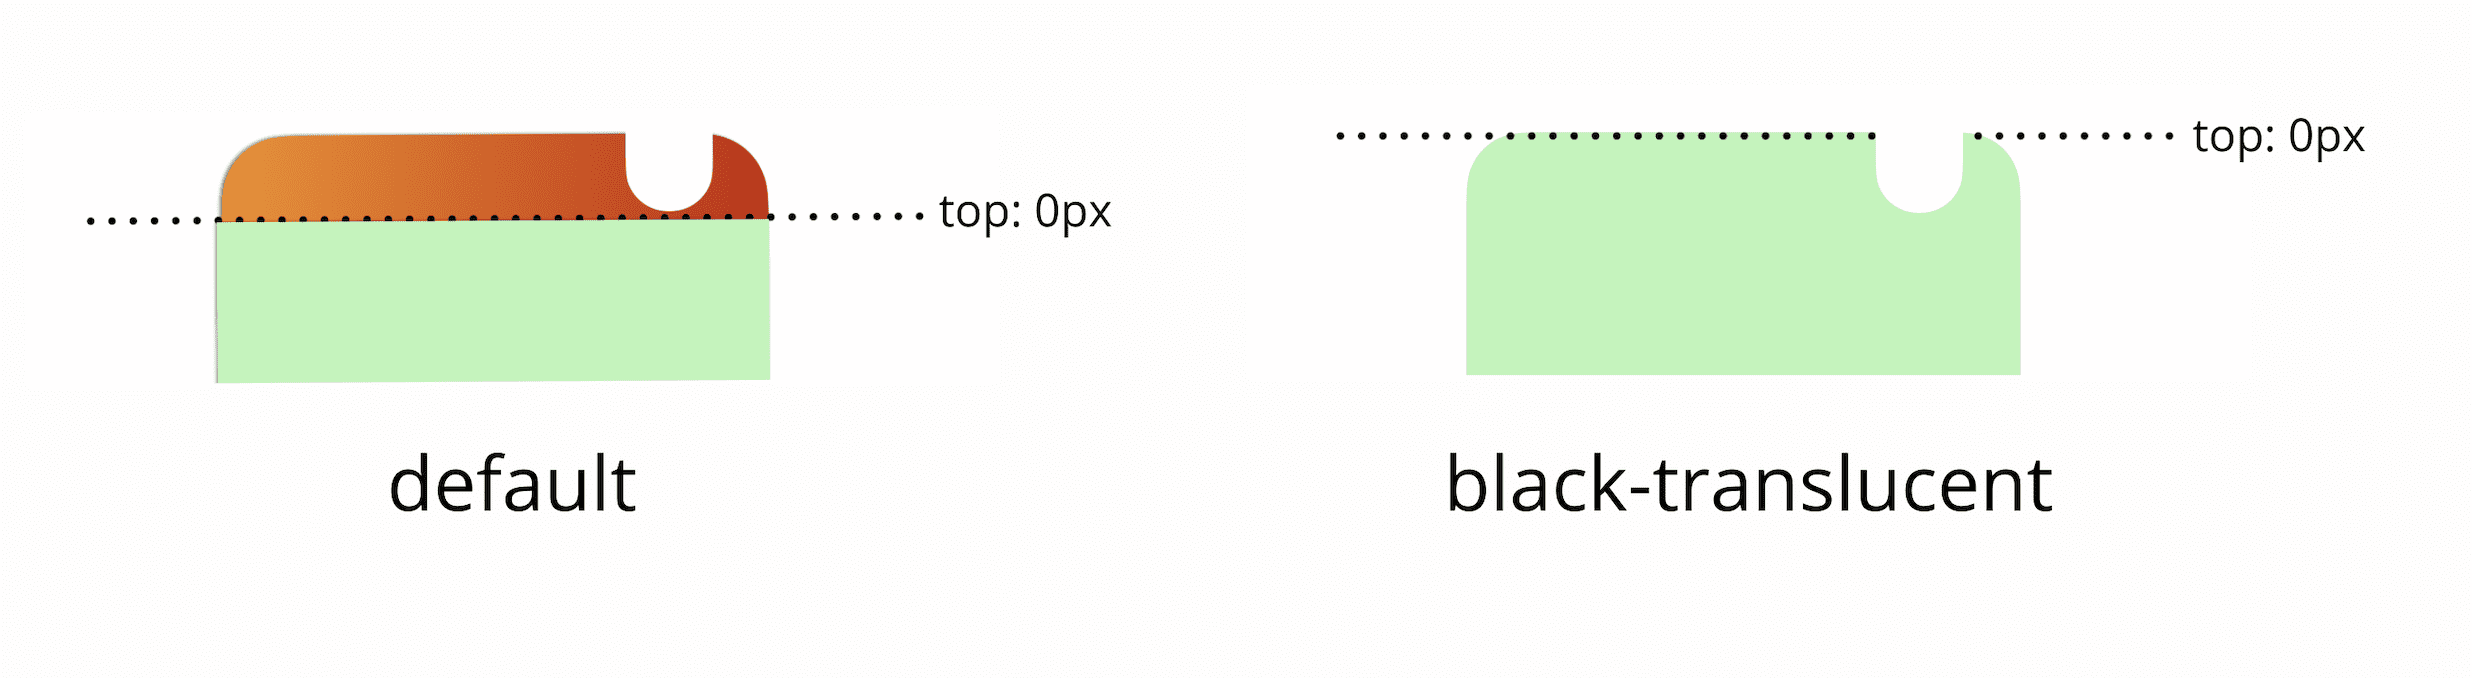 The top 0px of your viewport is below the status bar by default; if you add a black-translucent meta tag, the top 0px of your viewport will match the physical top of the screen